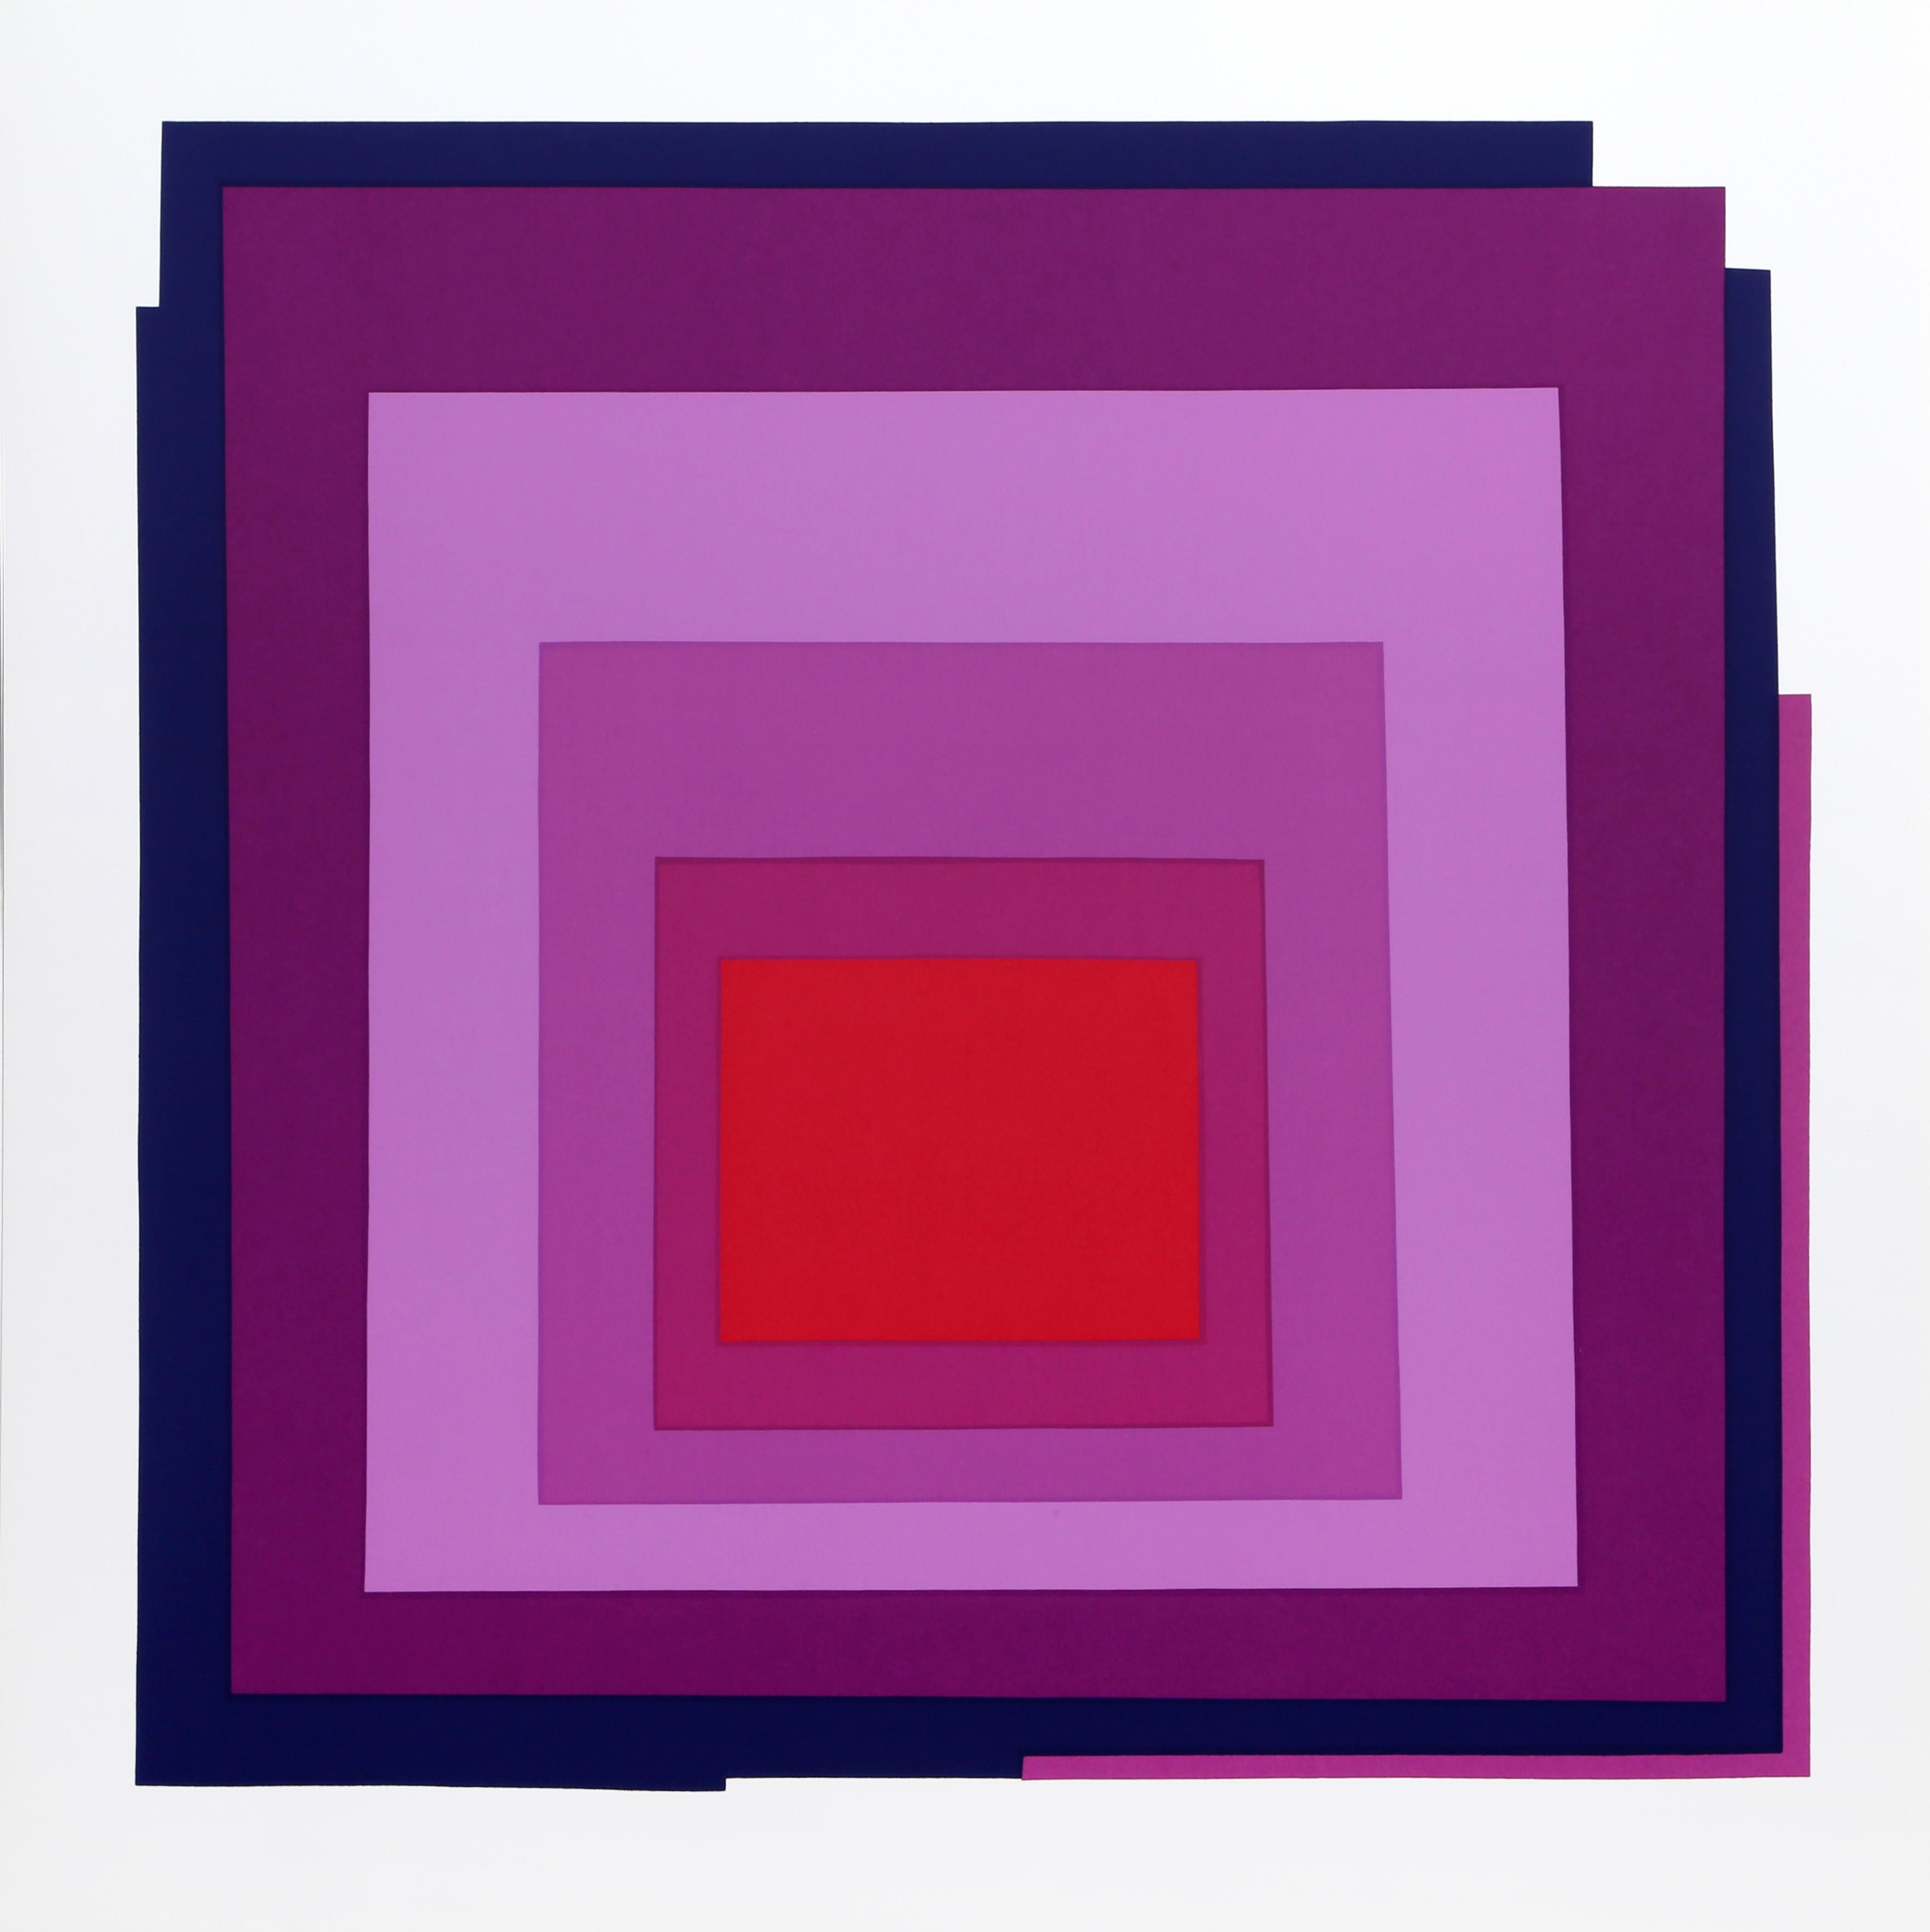 A colorful geometric screenprint by American artist Barbara Lynch Zinkel inspired by the Josef Albers "Homage to the Square".

Date: 1994
Medium: Screenprint, estate stamped verso and numbered in pencil
Edition: 250
Image Size: 25.5 x 26 inches
Size